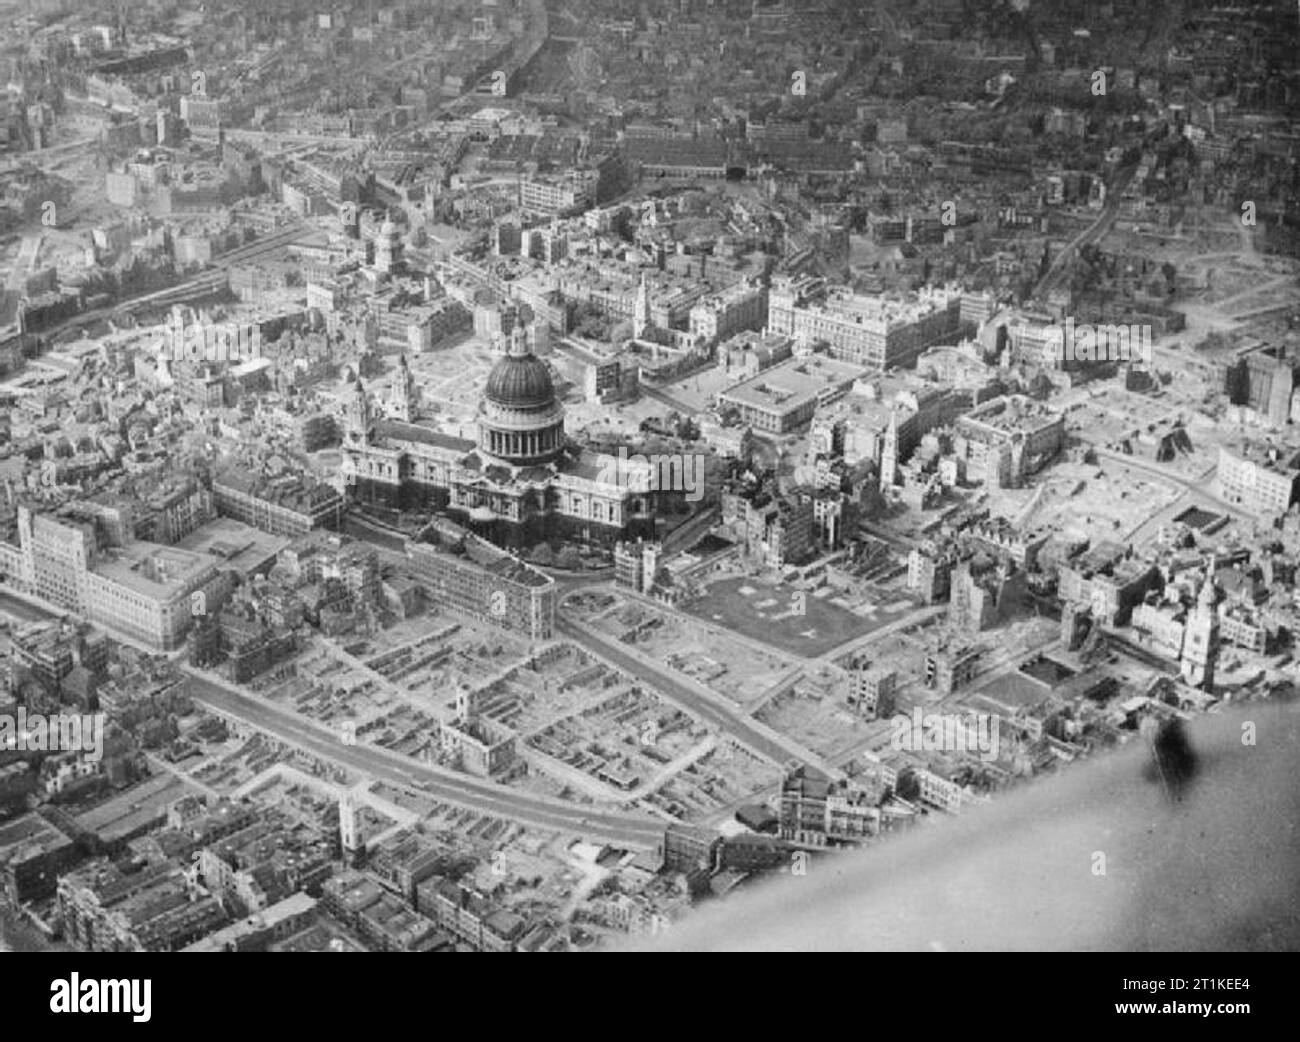 Bomb Damage in London, England, April 1945 Aerial view of the City of London around St Paul's Cathedral from the south-east in which the extent of bomb damage is clearly visible. Stock Photo